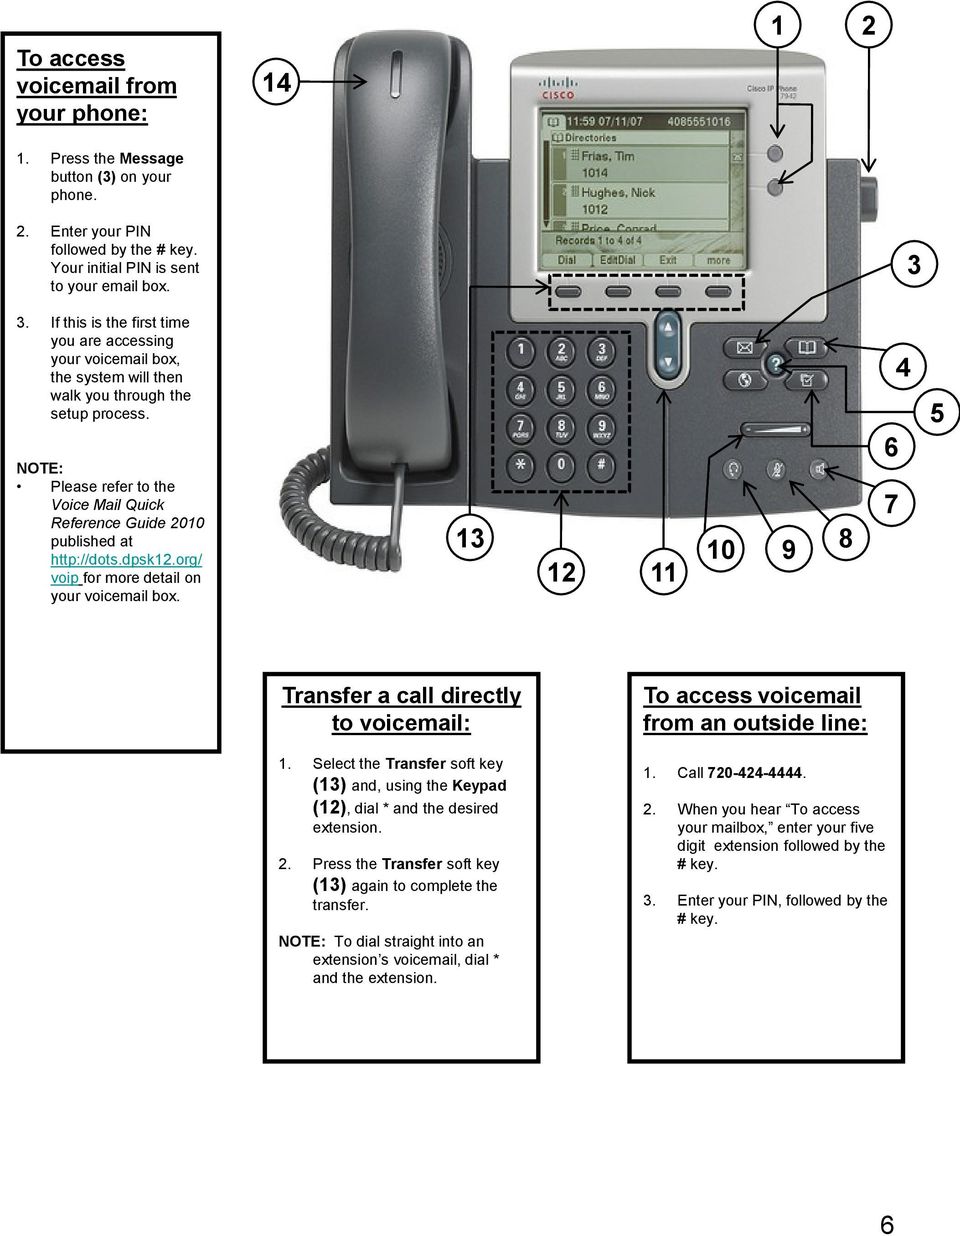 NOTE: Please refer to the Voice Mail Quick Reference Guide 20 published at http://dots.dpsk.org/ voip for more detail on your voicemail box. 1 Transfer a call directly to voicemail: 1.